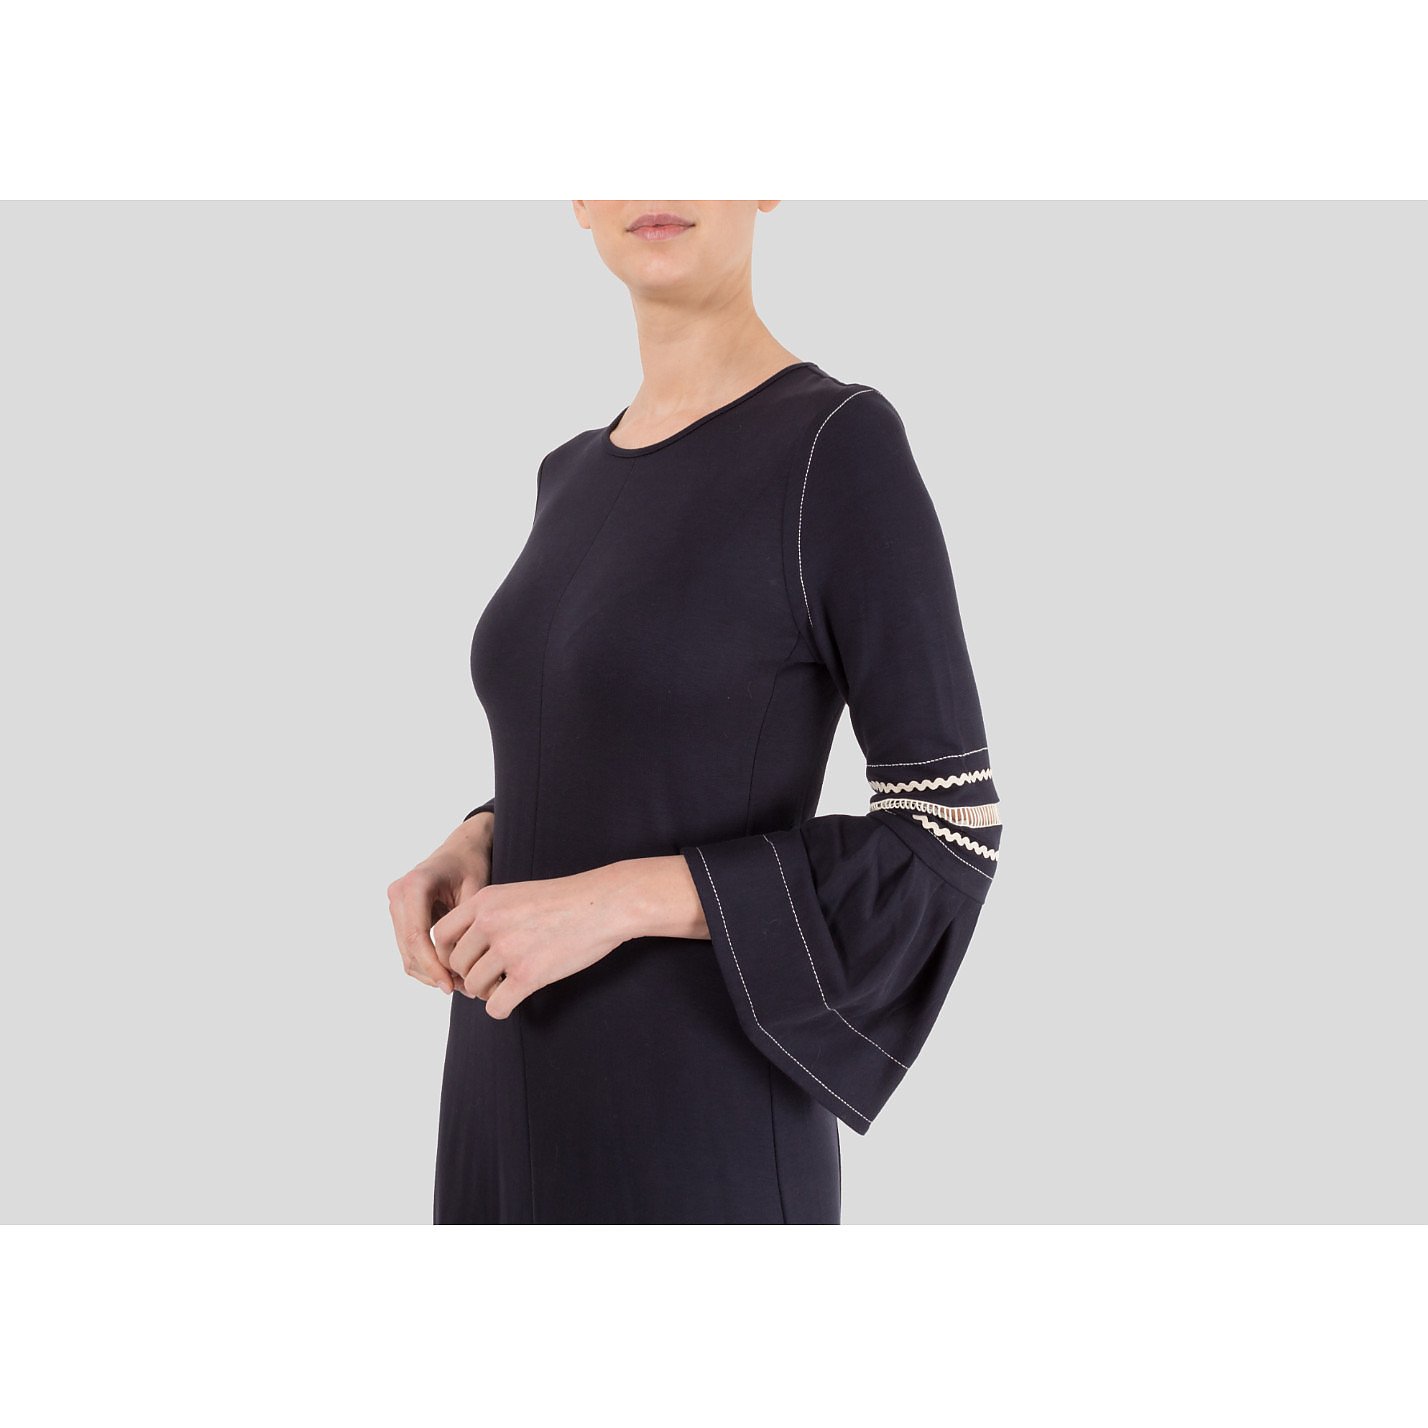 See By Chloé Lattice-Trimmed Jersey Midi Dress